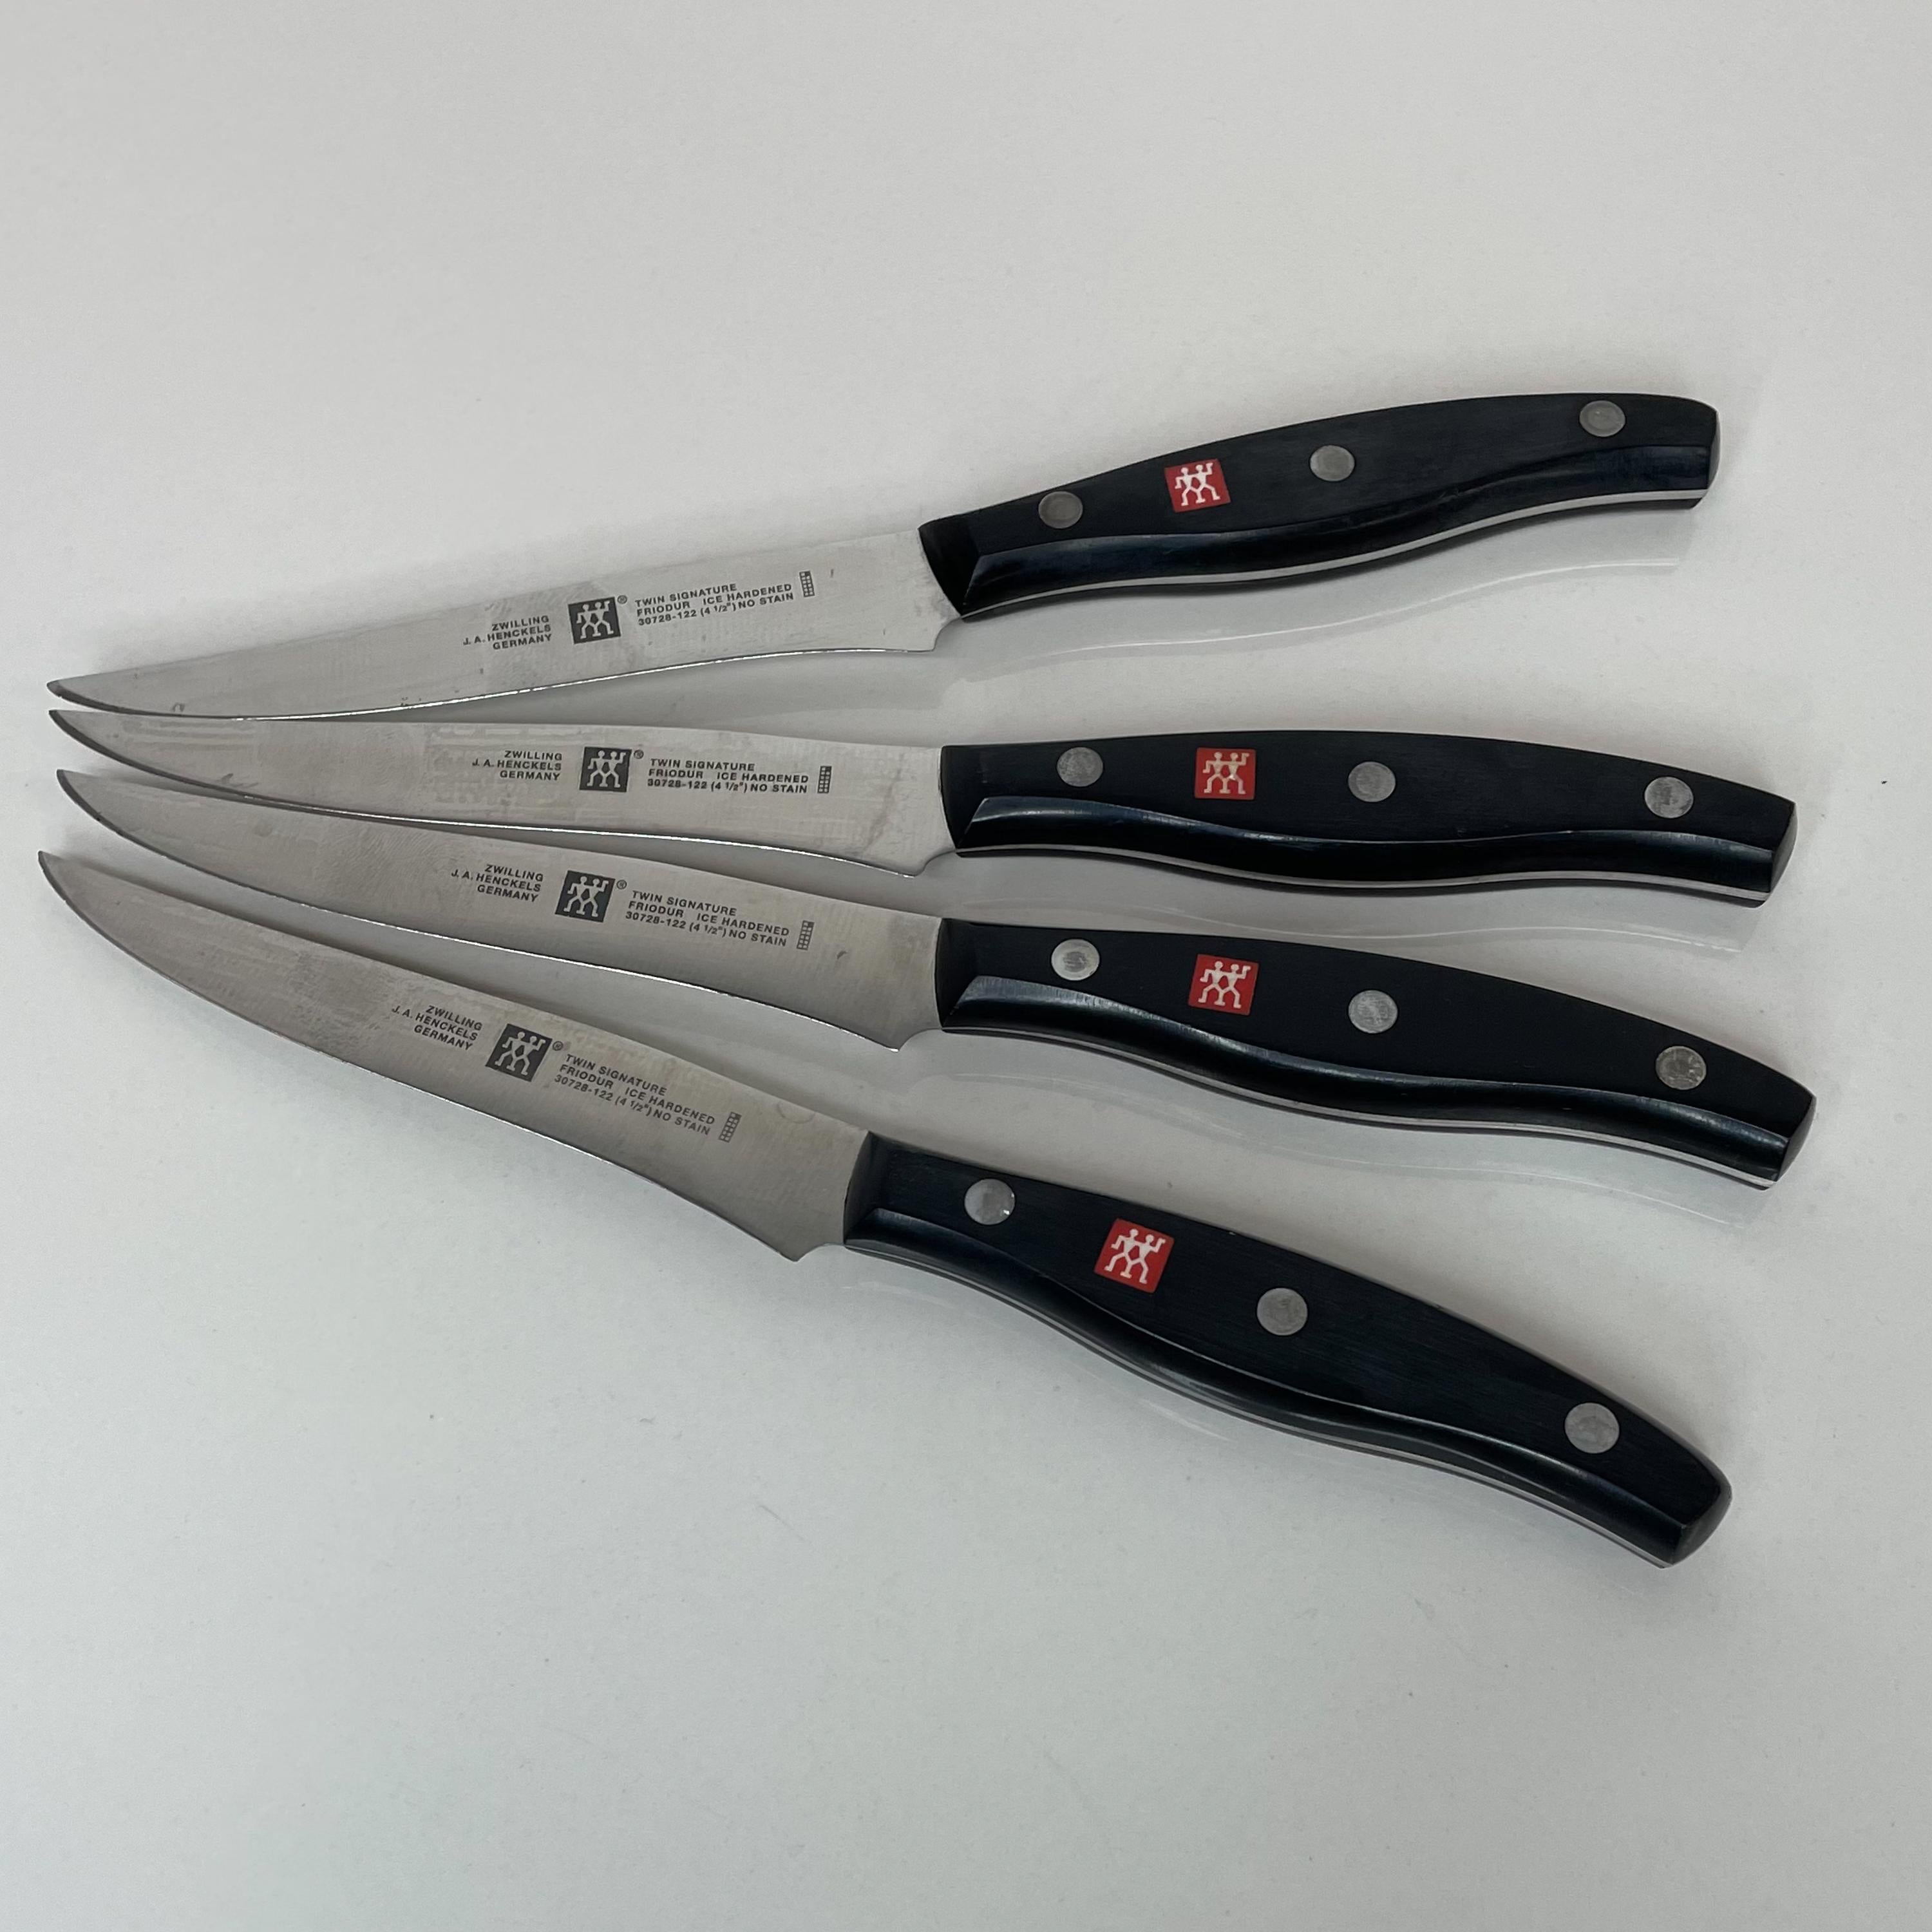 Mid-Century Modern 1970s Zwilling Set of 6 Black Knives by J A Henckels made in Germany 